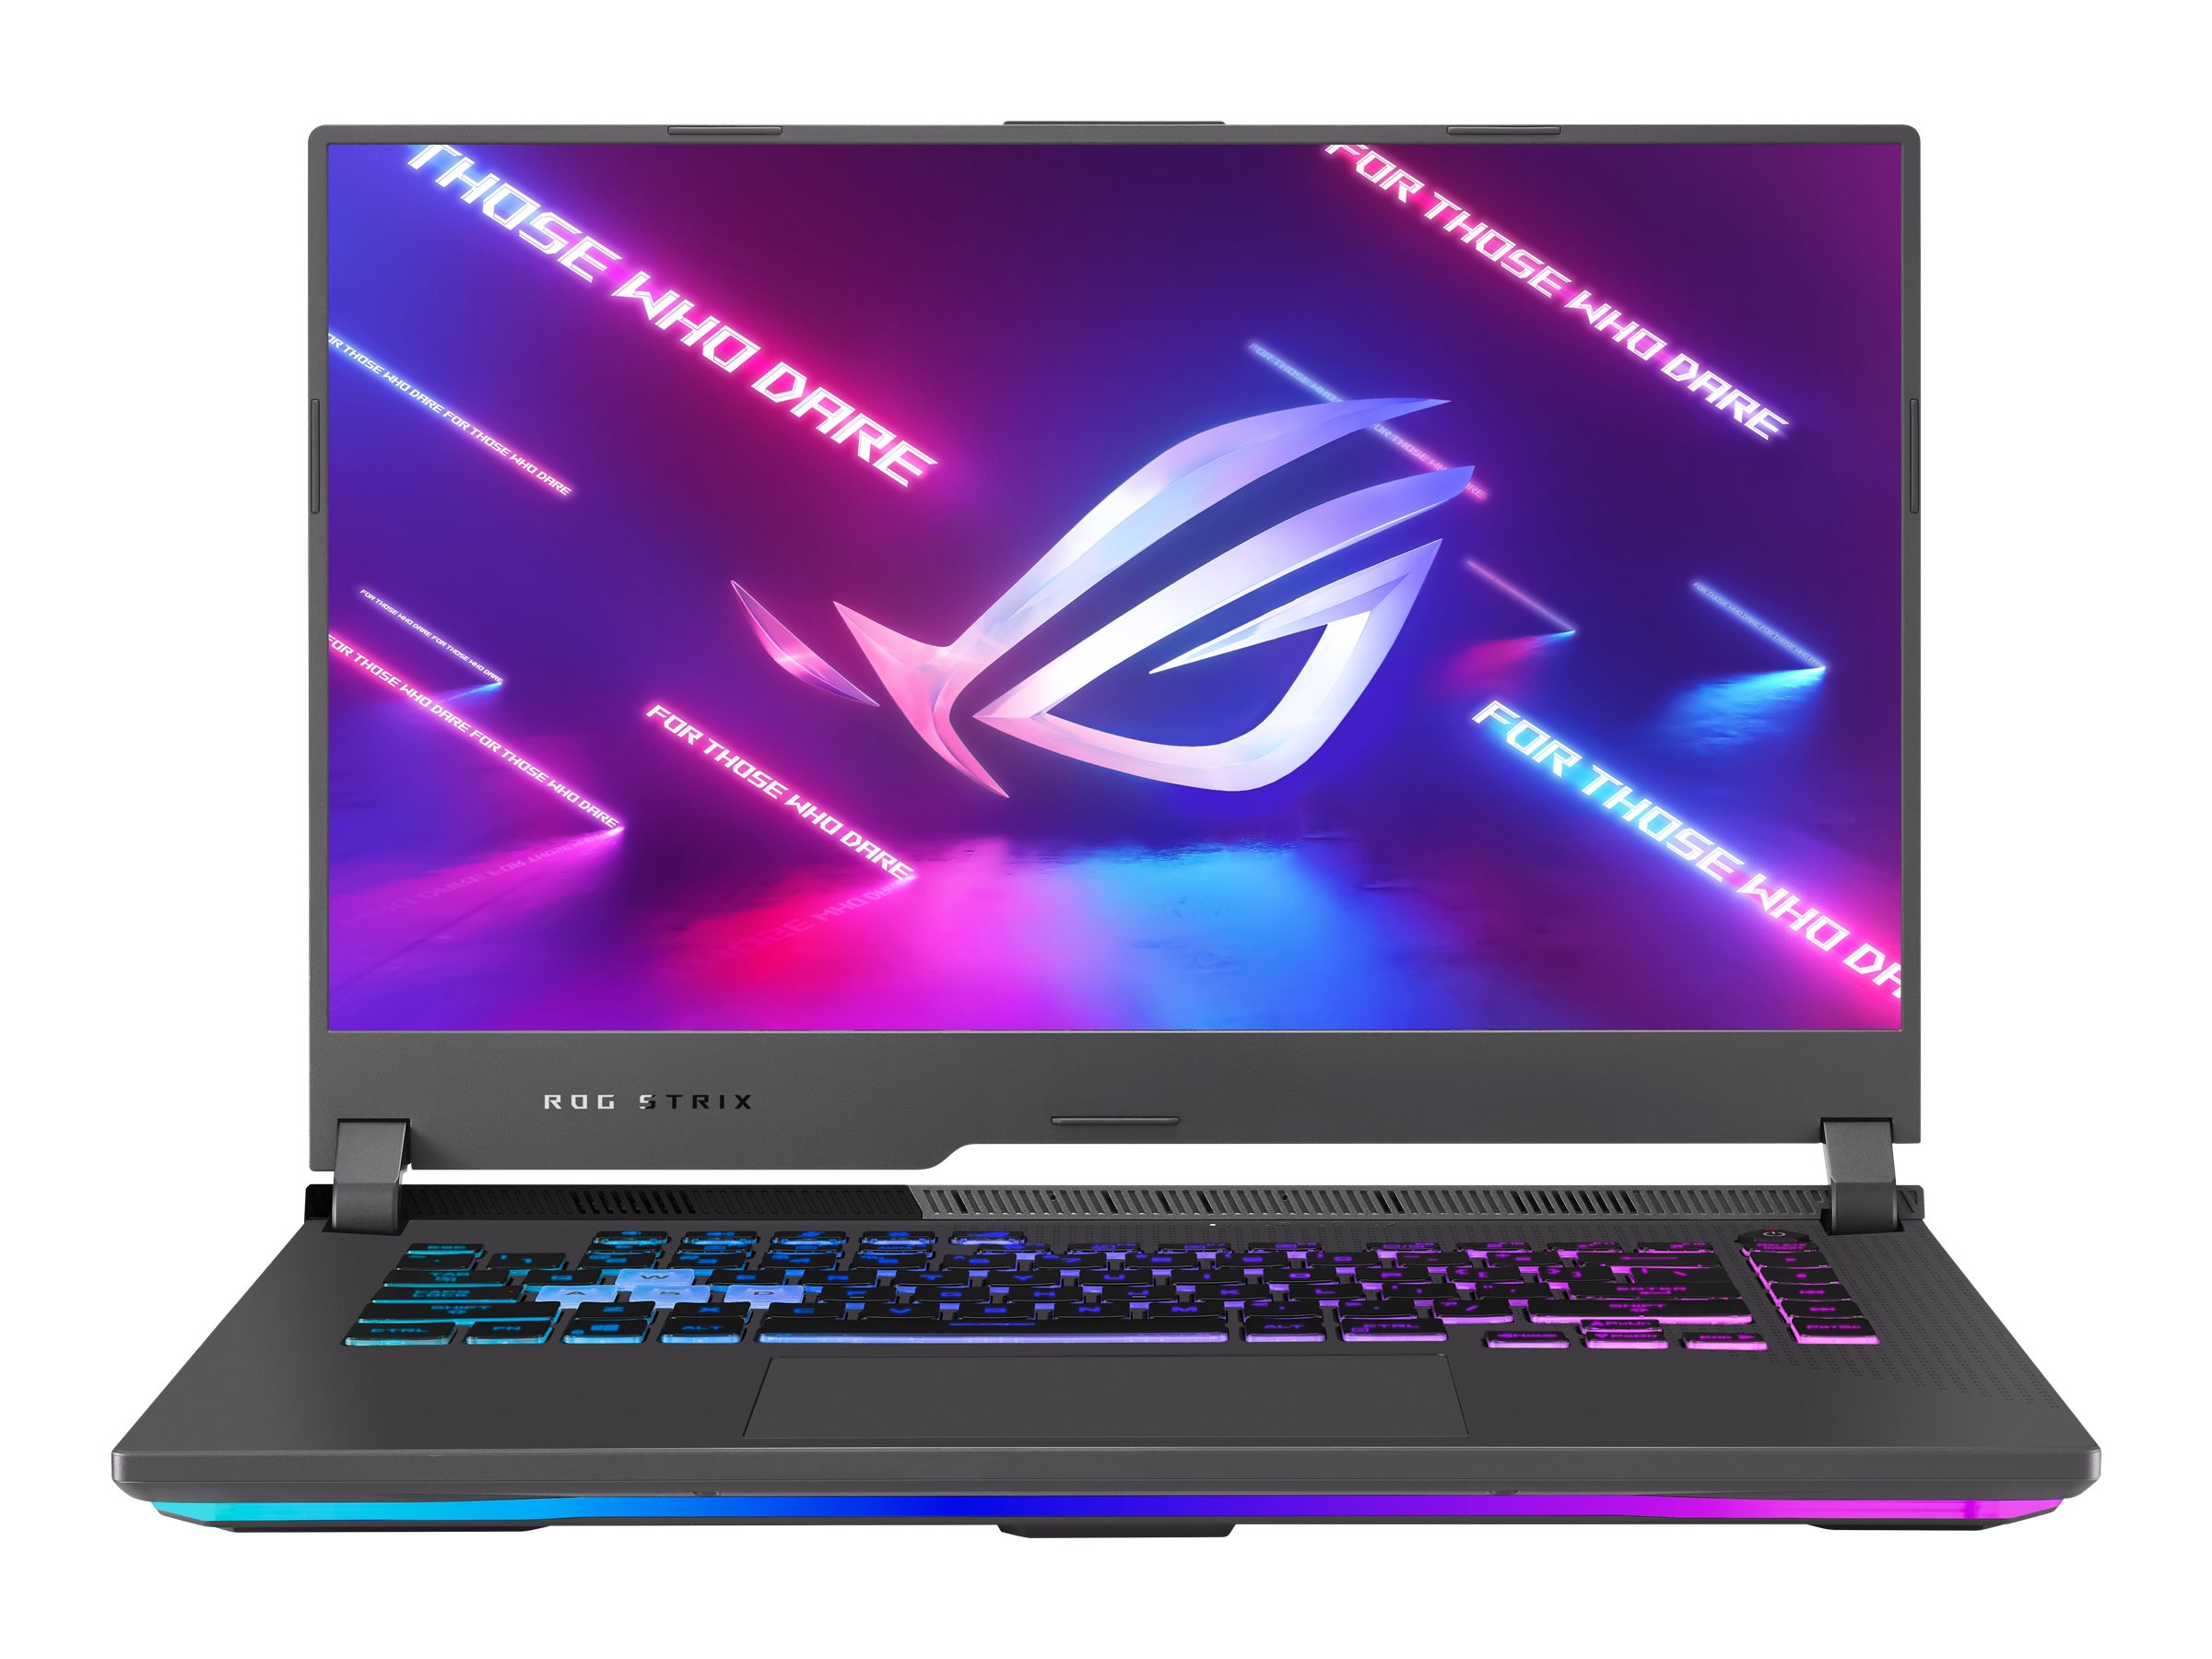 ASUS ROG Strix G15 Gaming Laptop - 15.6 Inch - 16 GB RAM - 1 TB SSD - AMD Ryzen 7 6800H - RTX 3050 - Eclipse Grey - G513RC-DS71 - Open Box or Display Models Only